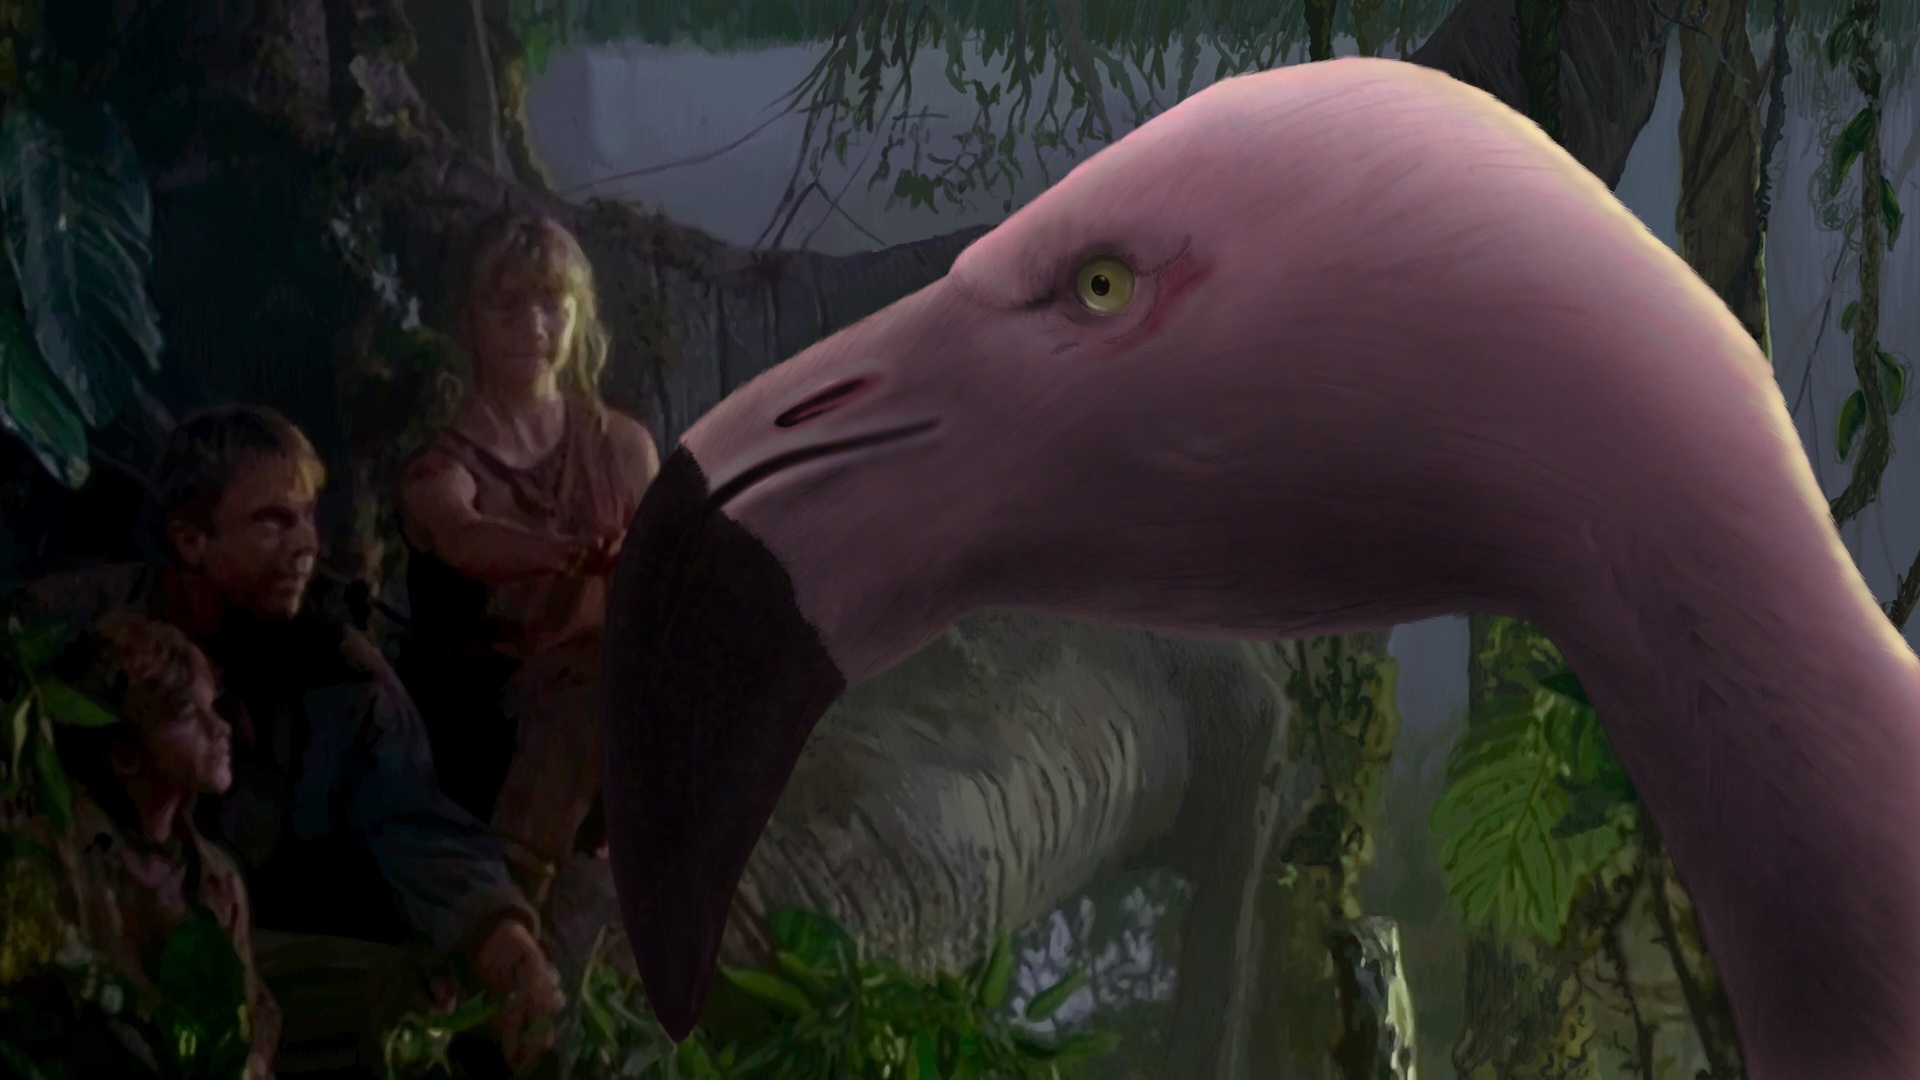 Digitally painted reproduction of of a frame from Jurassic Park, but instead of a brachiosaurus, it's a giant flamingo.'